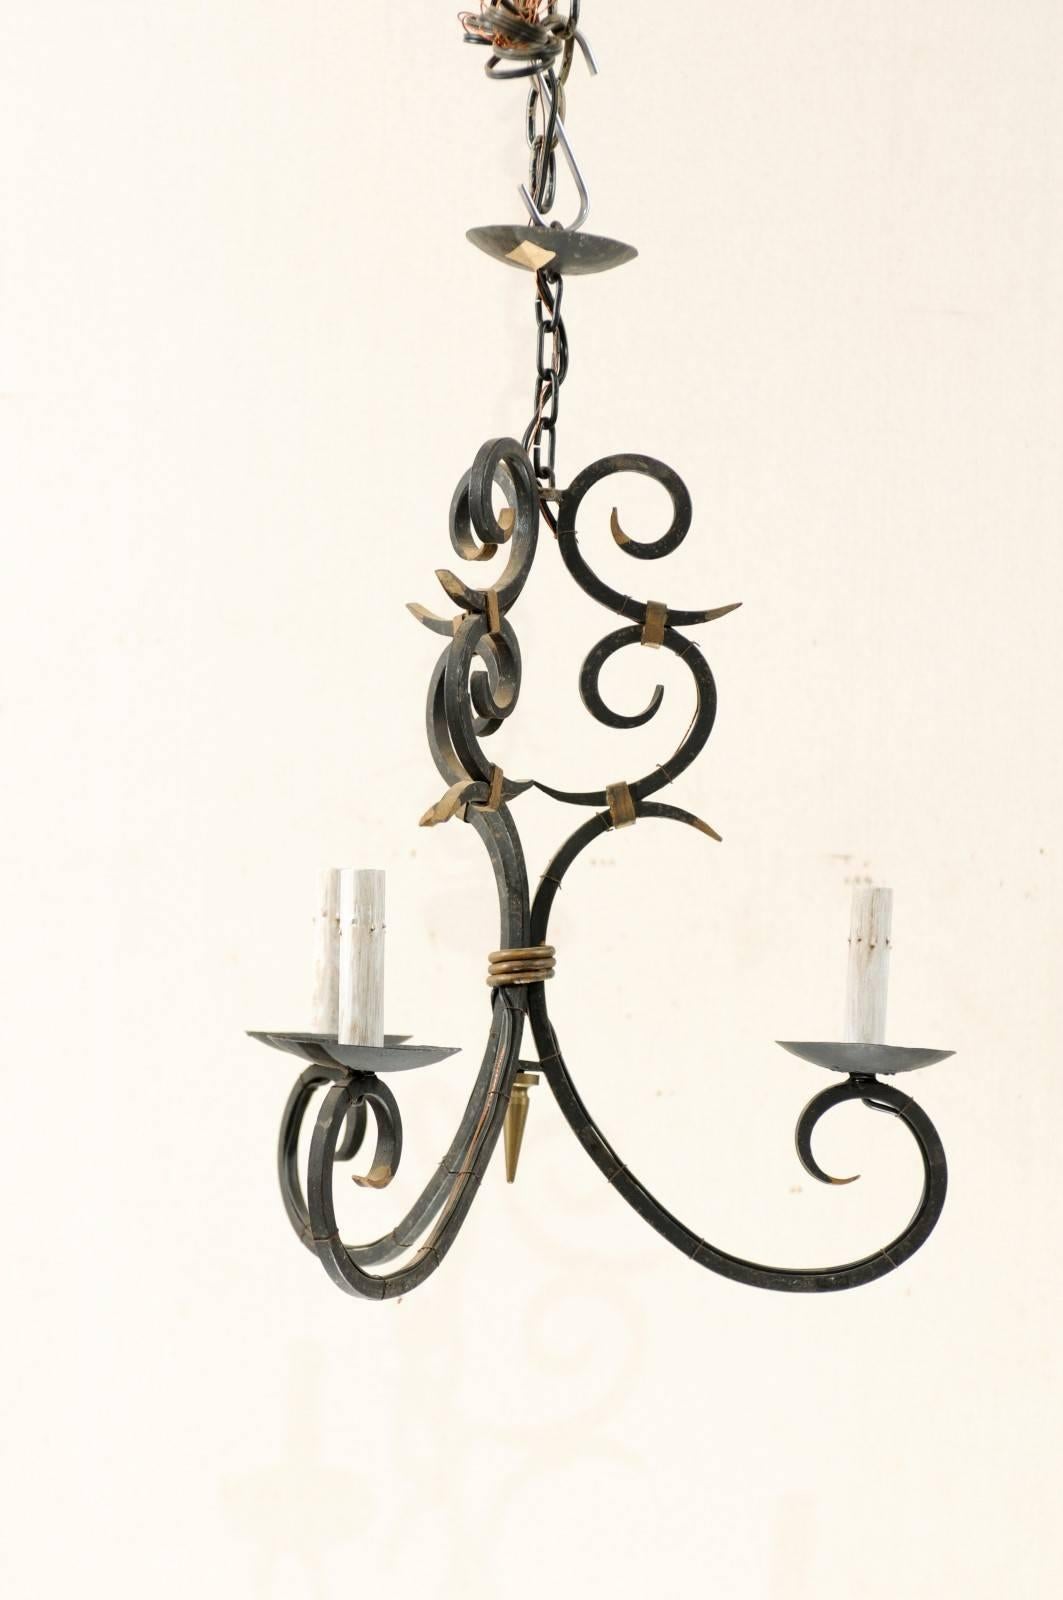 20th Century French Forged Iron Three-Light Chandelier with Scrolled Arms and Gilded Accents